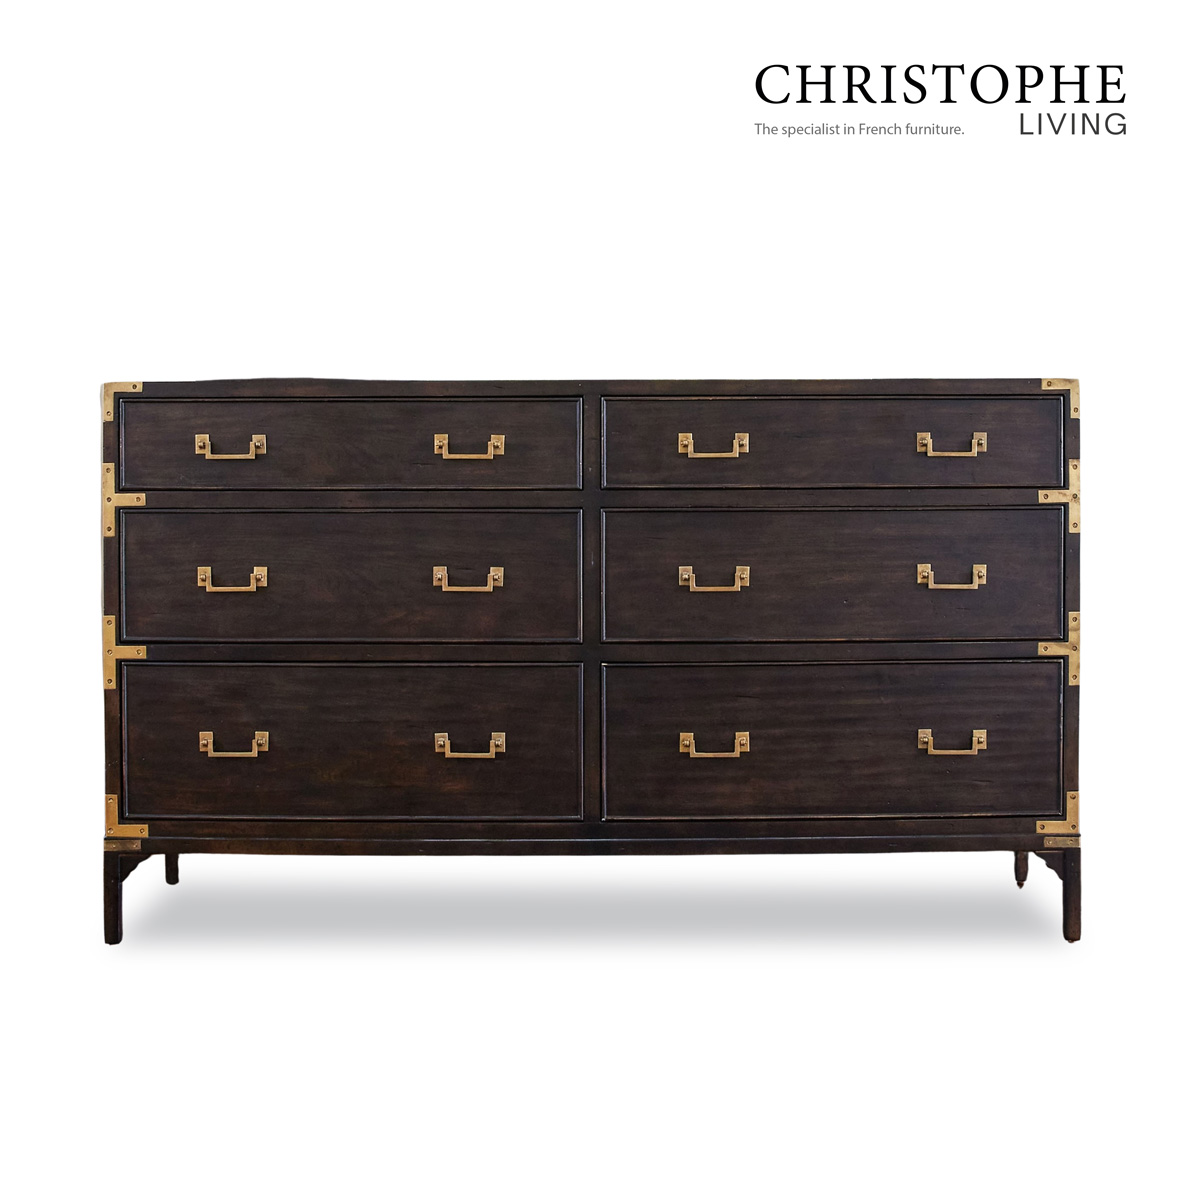 Holland French Provincial Bedroom and Living Room Chest of 6 Drawers in Charcoal Dark Timber